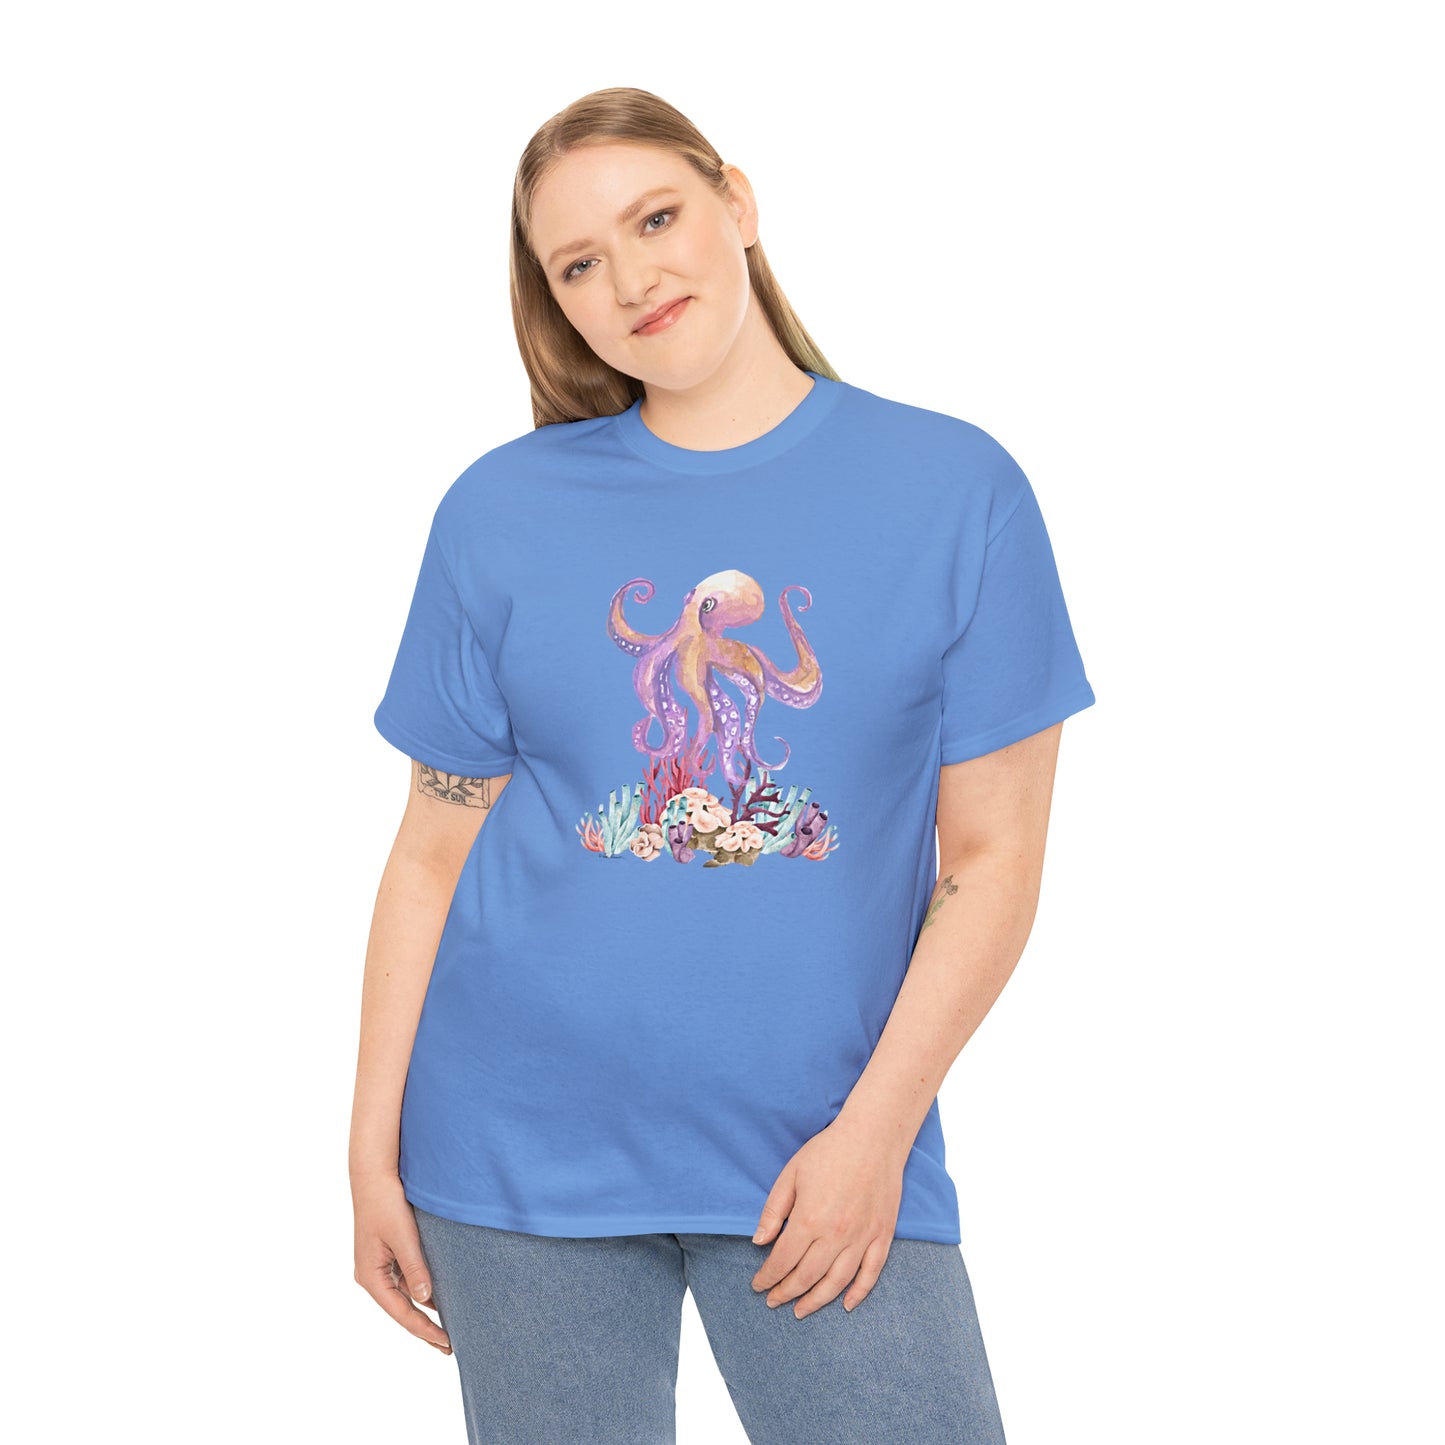 Mock up of a blonde-haired woman wearing the Carolina Blue shirt